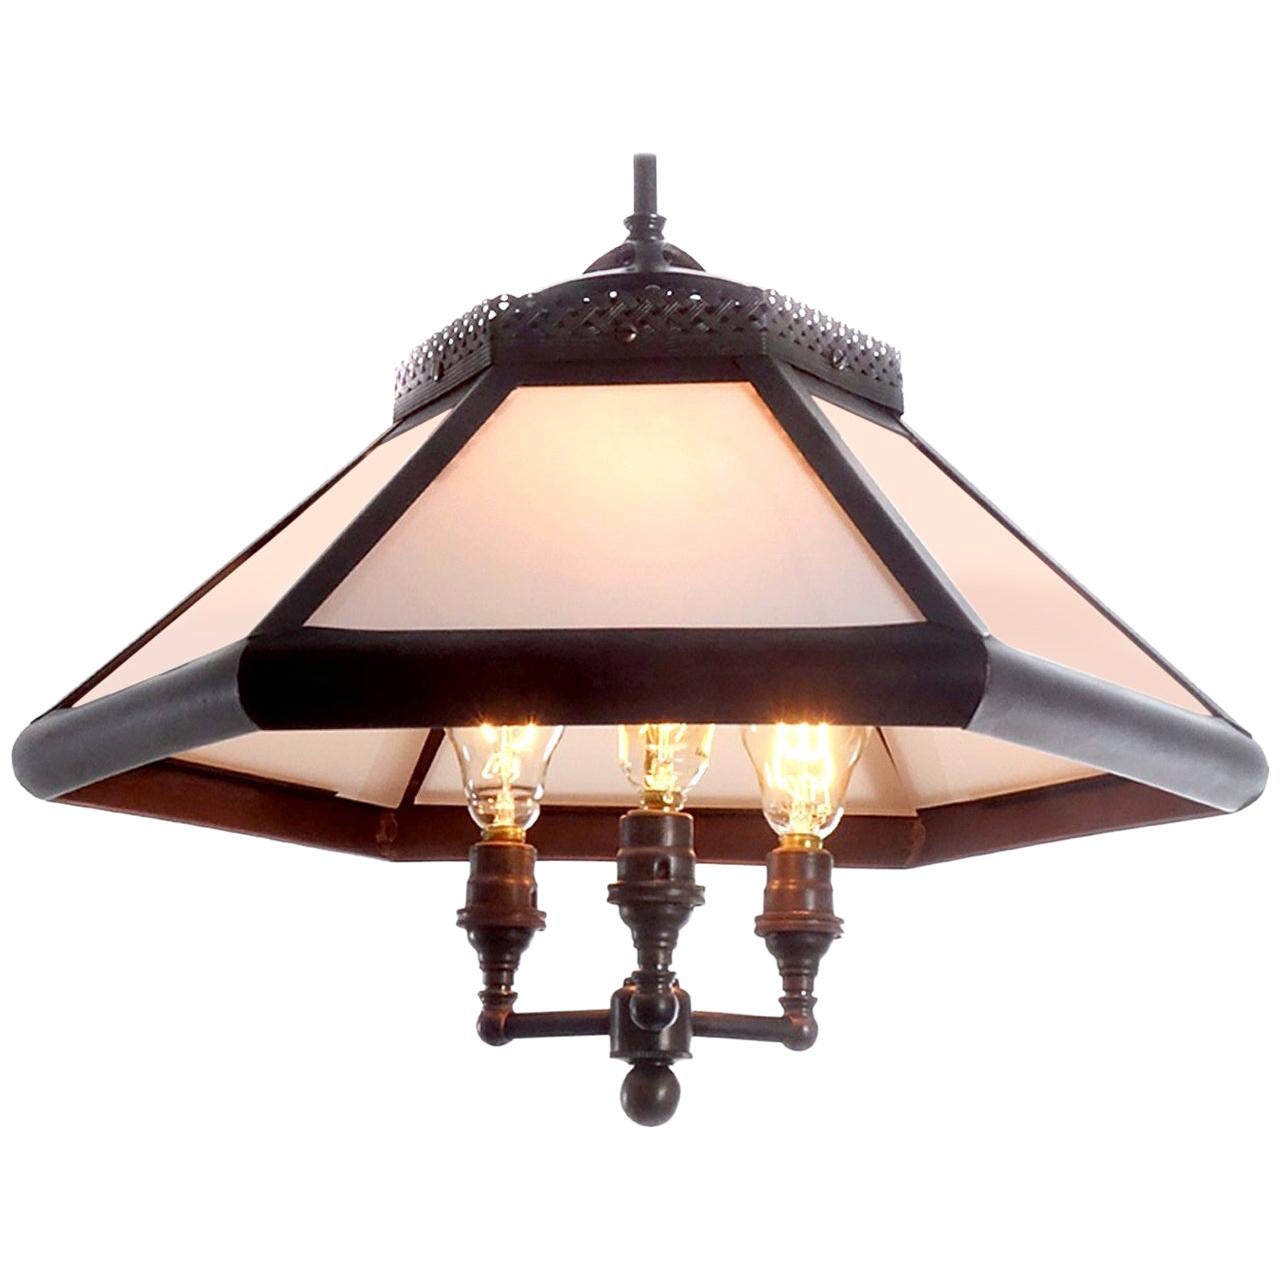 Six-Panel Gas Lamp, Copper and Milk Glass For Sale